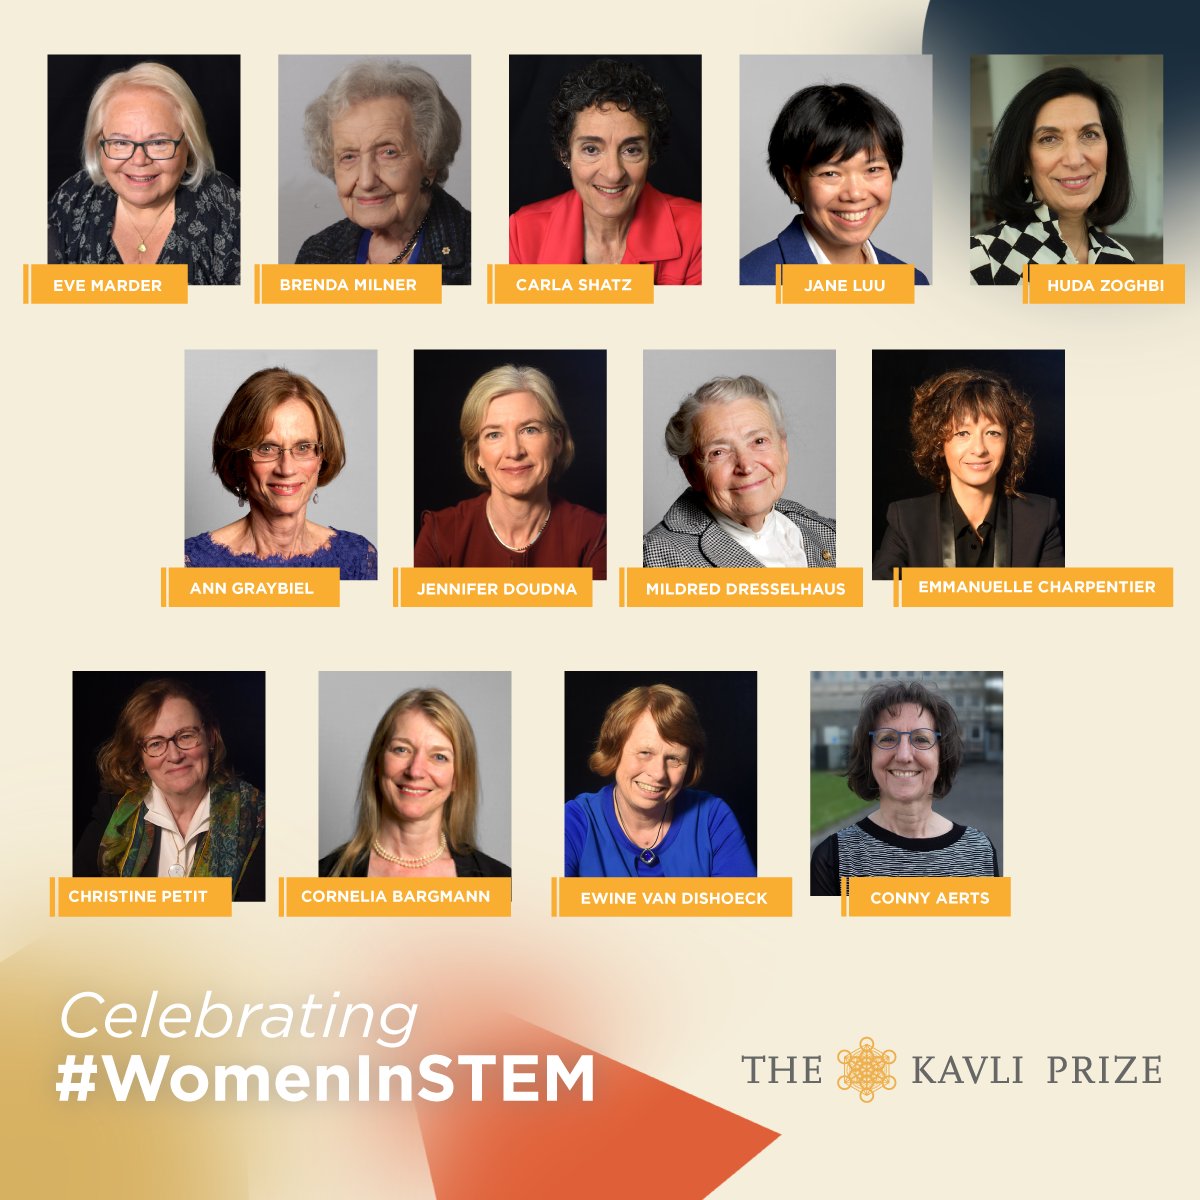 Happy International Women and Girls in STEM Day! We're celebrating our #KavliPrize Laureates and their breakthrough discoveries in astrophysics, nanoscience, and neuroscience. #WomeninSTEM